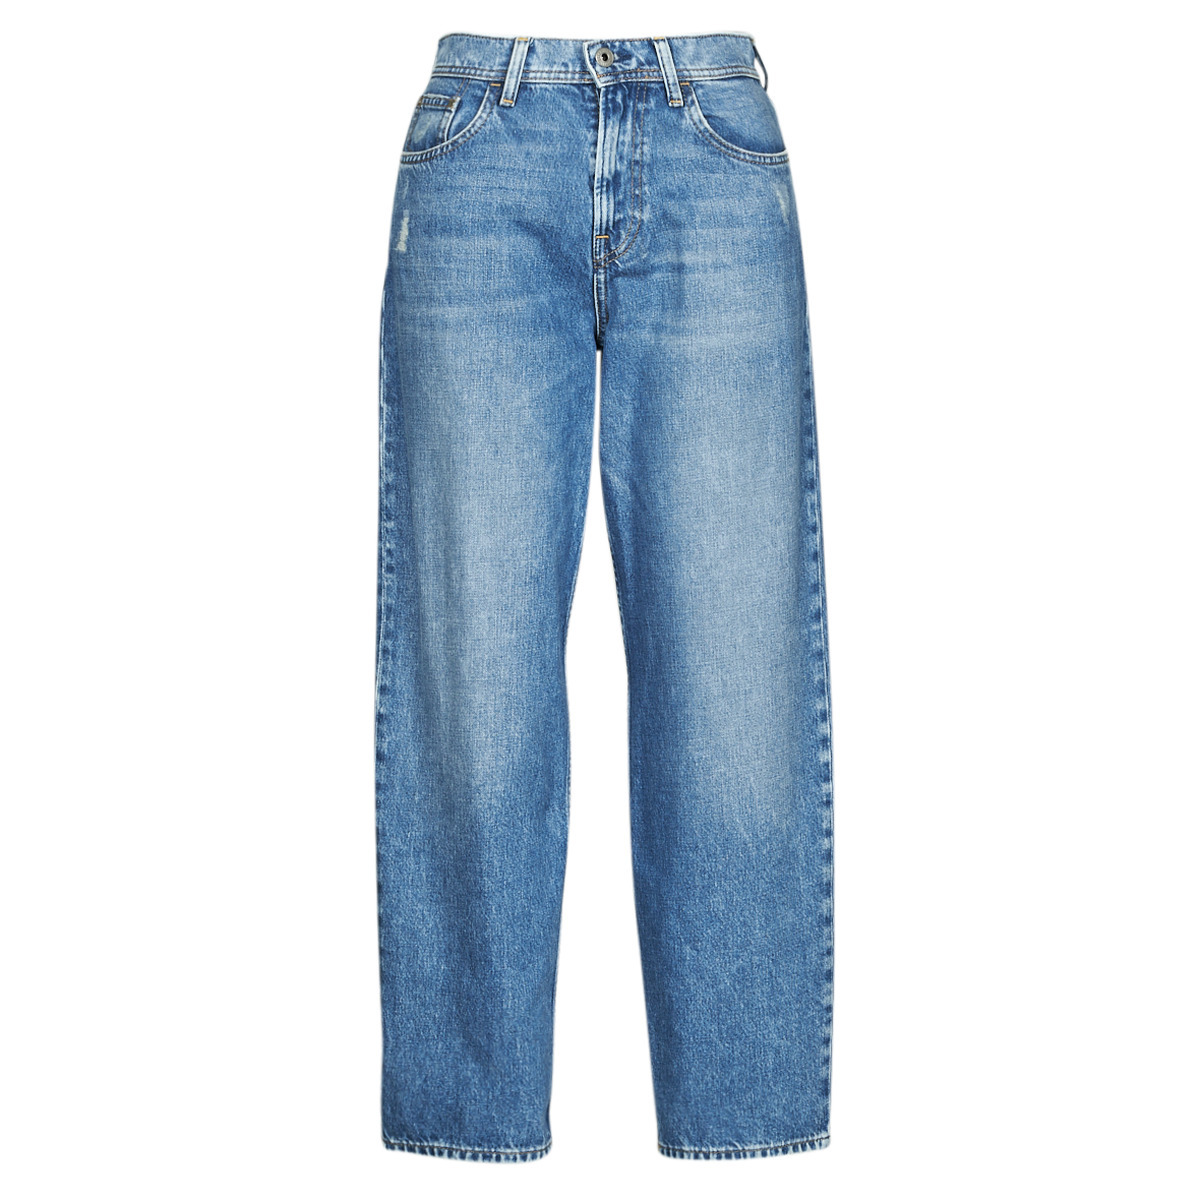 Spartoo Blue Jeans by Pepe Jeans GOOFASH